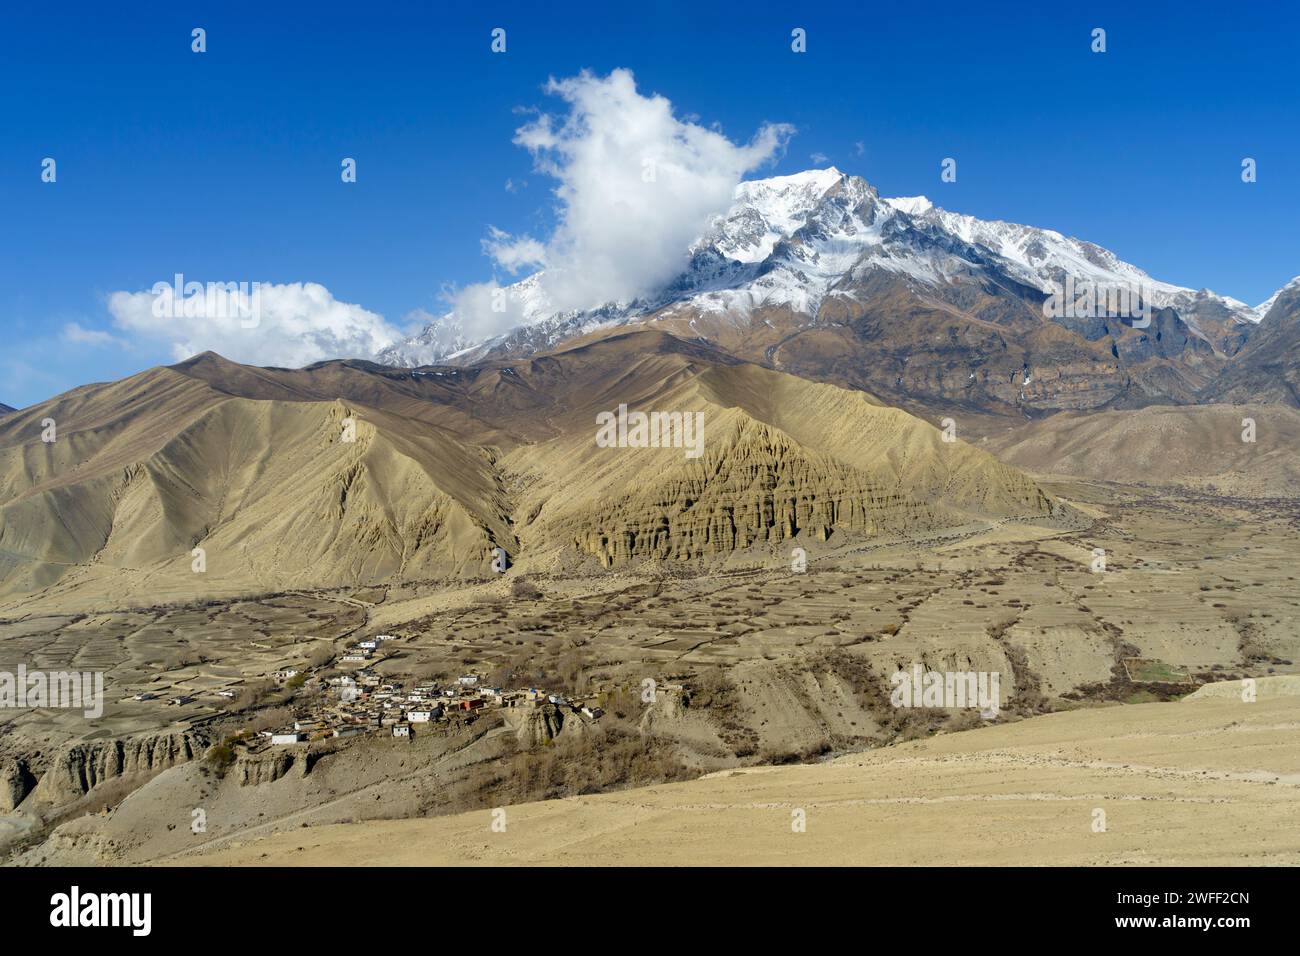 Spectacular desertic landscape with snow capped mountains and small village  near Dhakmar,  Upper Mustang region, Nepal. Stock Photo